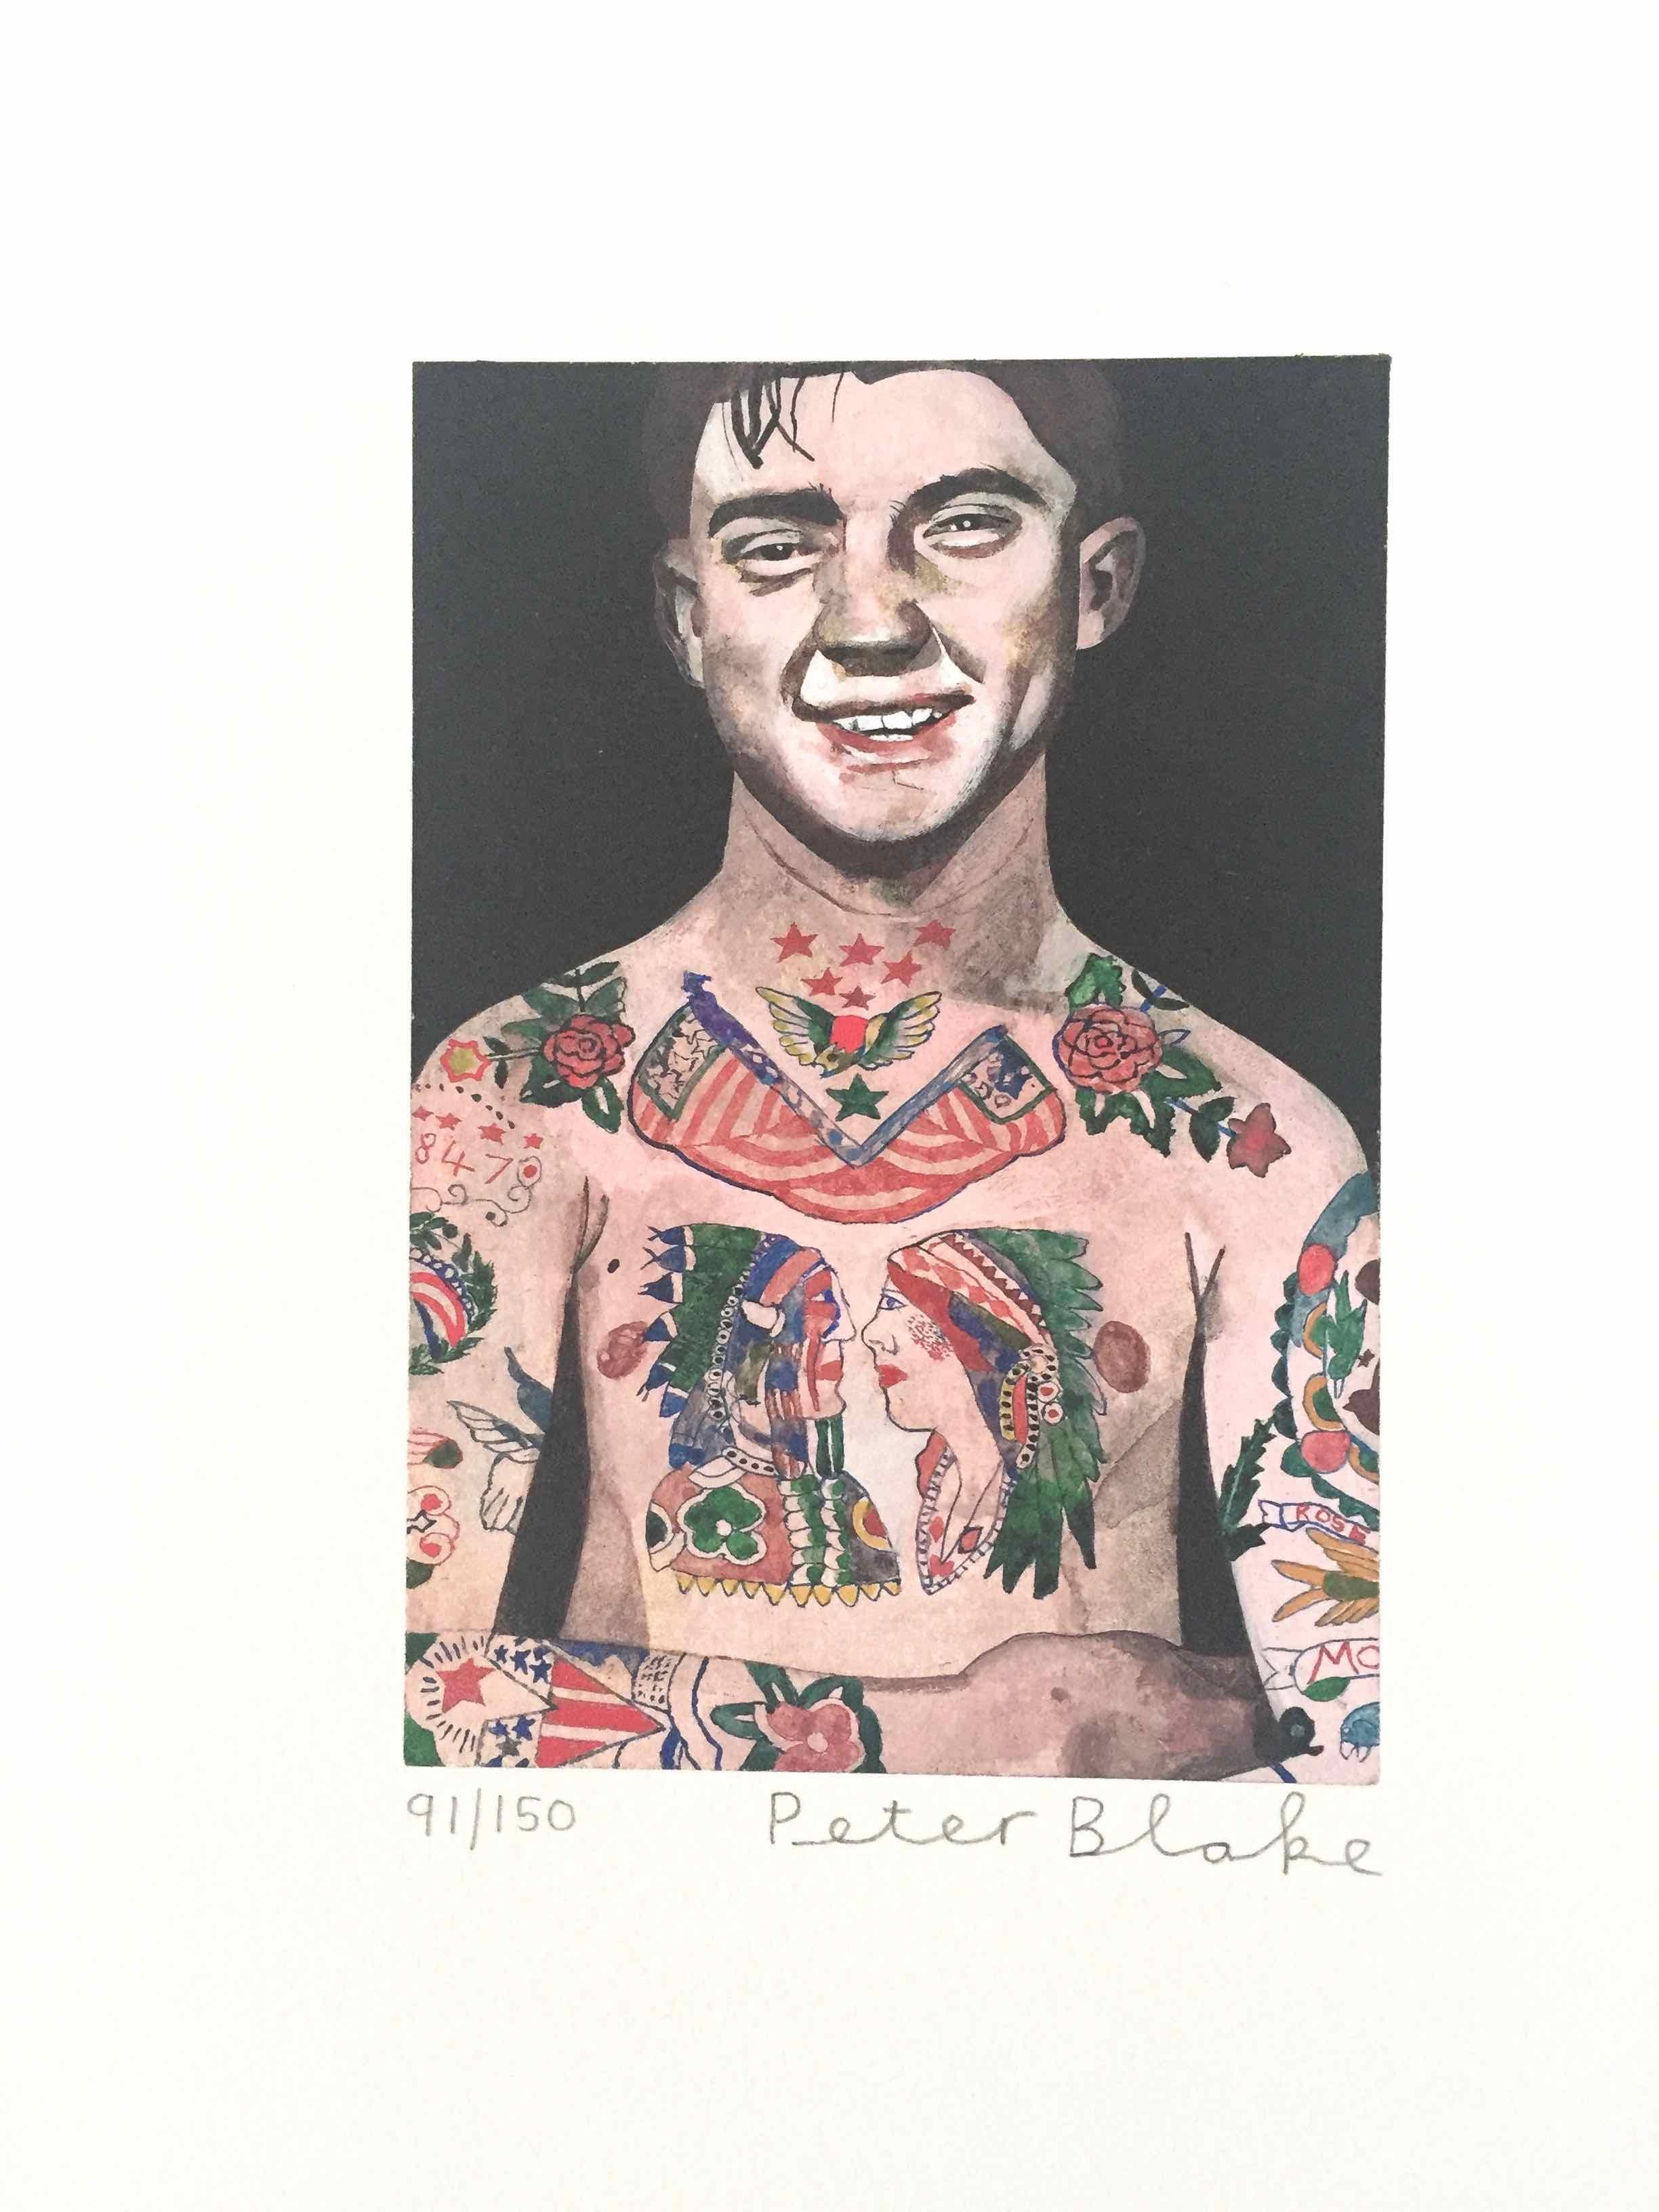 Tattooed People, Percy, 2015, Archival limited edition inkjet print on photo rag satin paper, Edition 103/150, 11 × 8 3/10 in, 28 × 21 cm, signed and numbered by Sir Peter Blake (unframed)

Widely regarded as the godfather of British Pop art and the